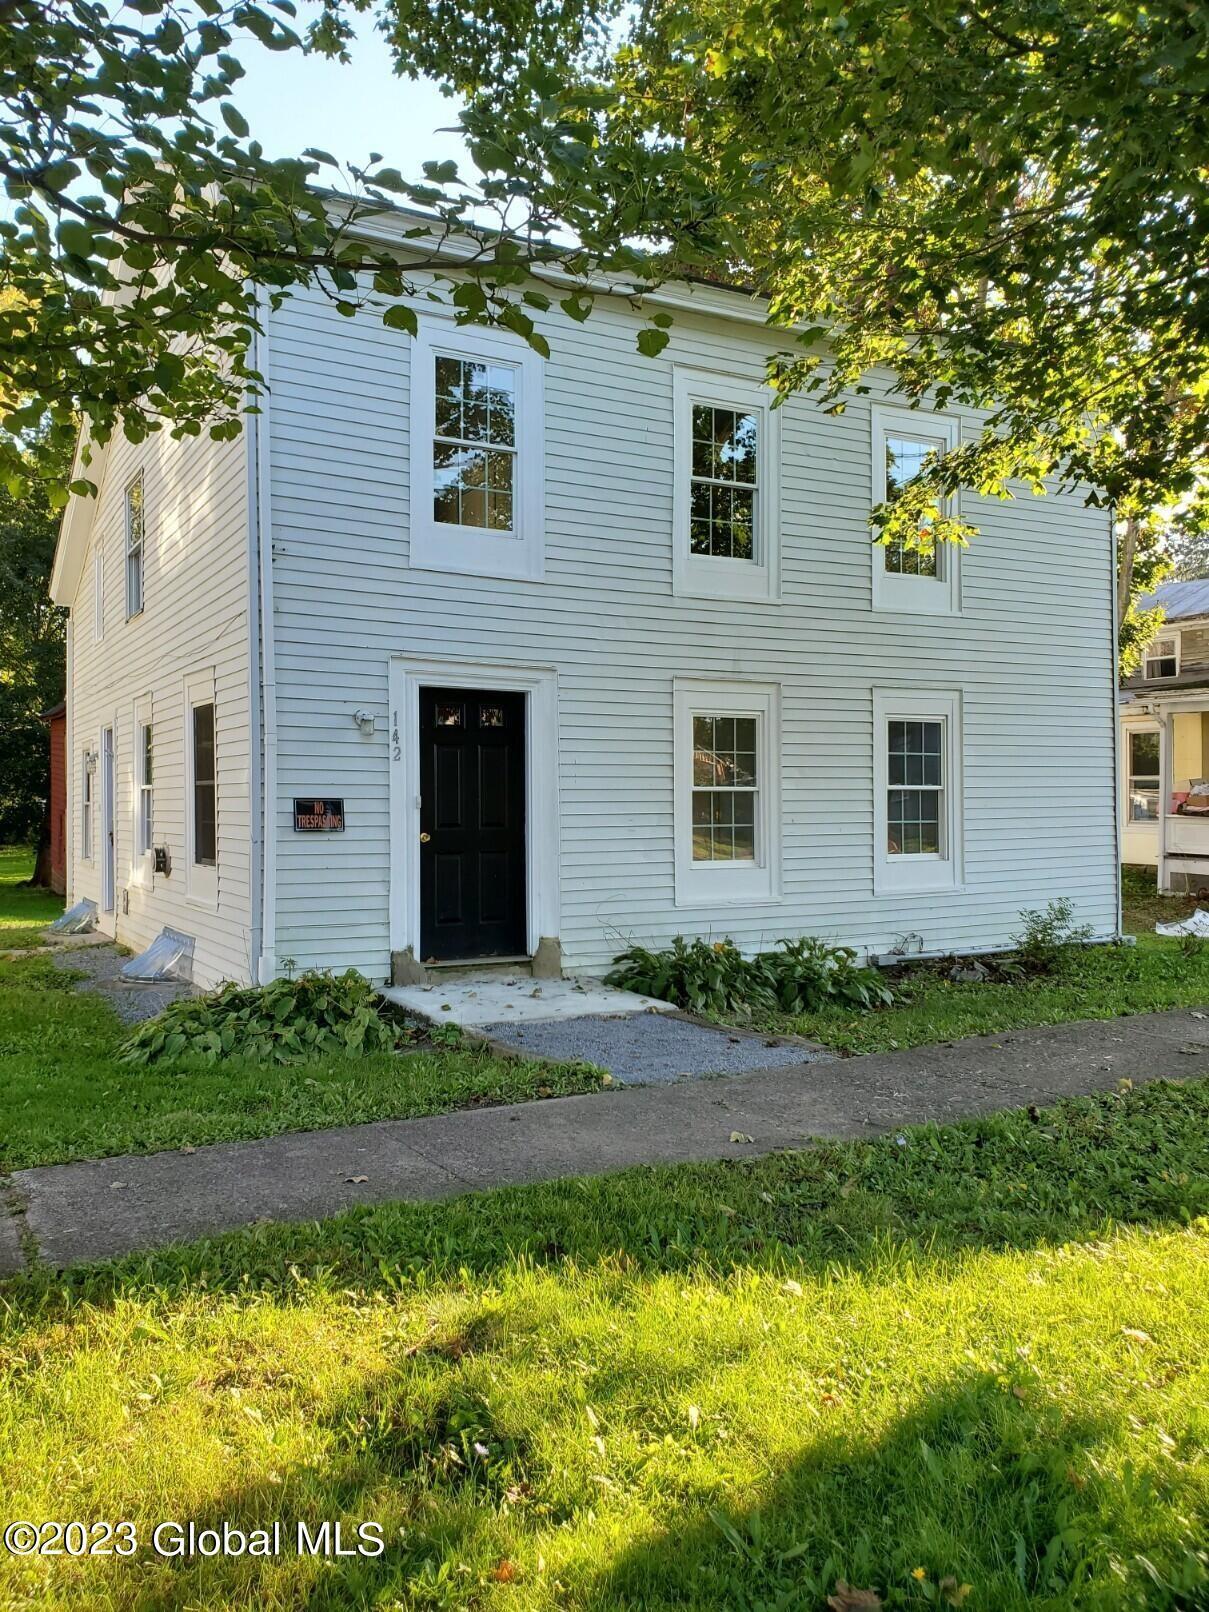 Property Image for 142 Main Street